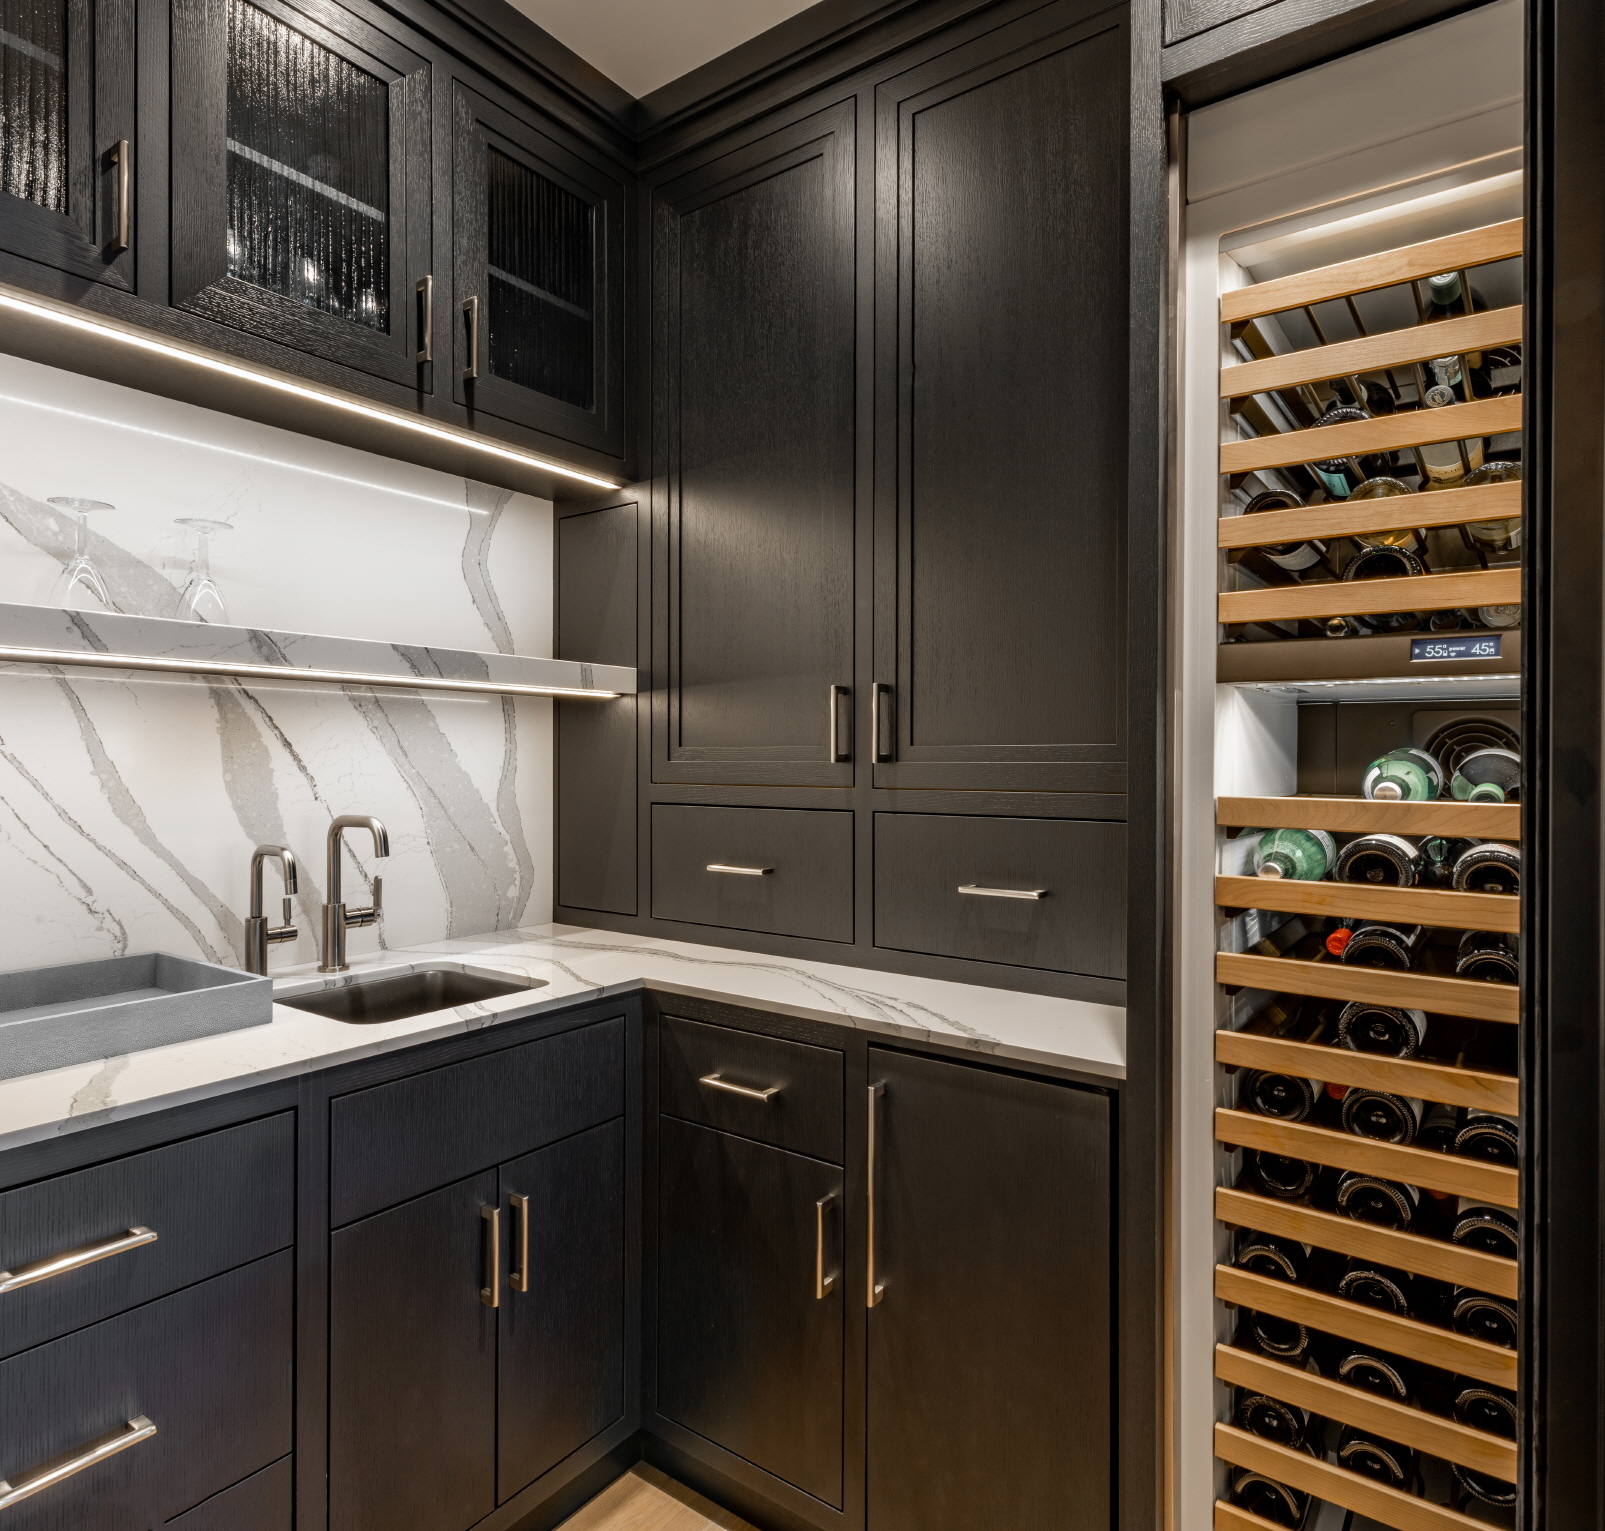 Declutter small kitchens for a larger appearance with innovative storage solutions.